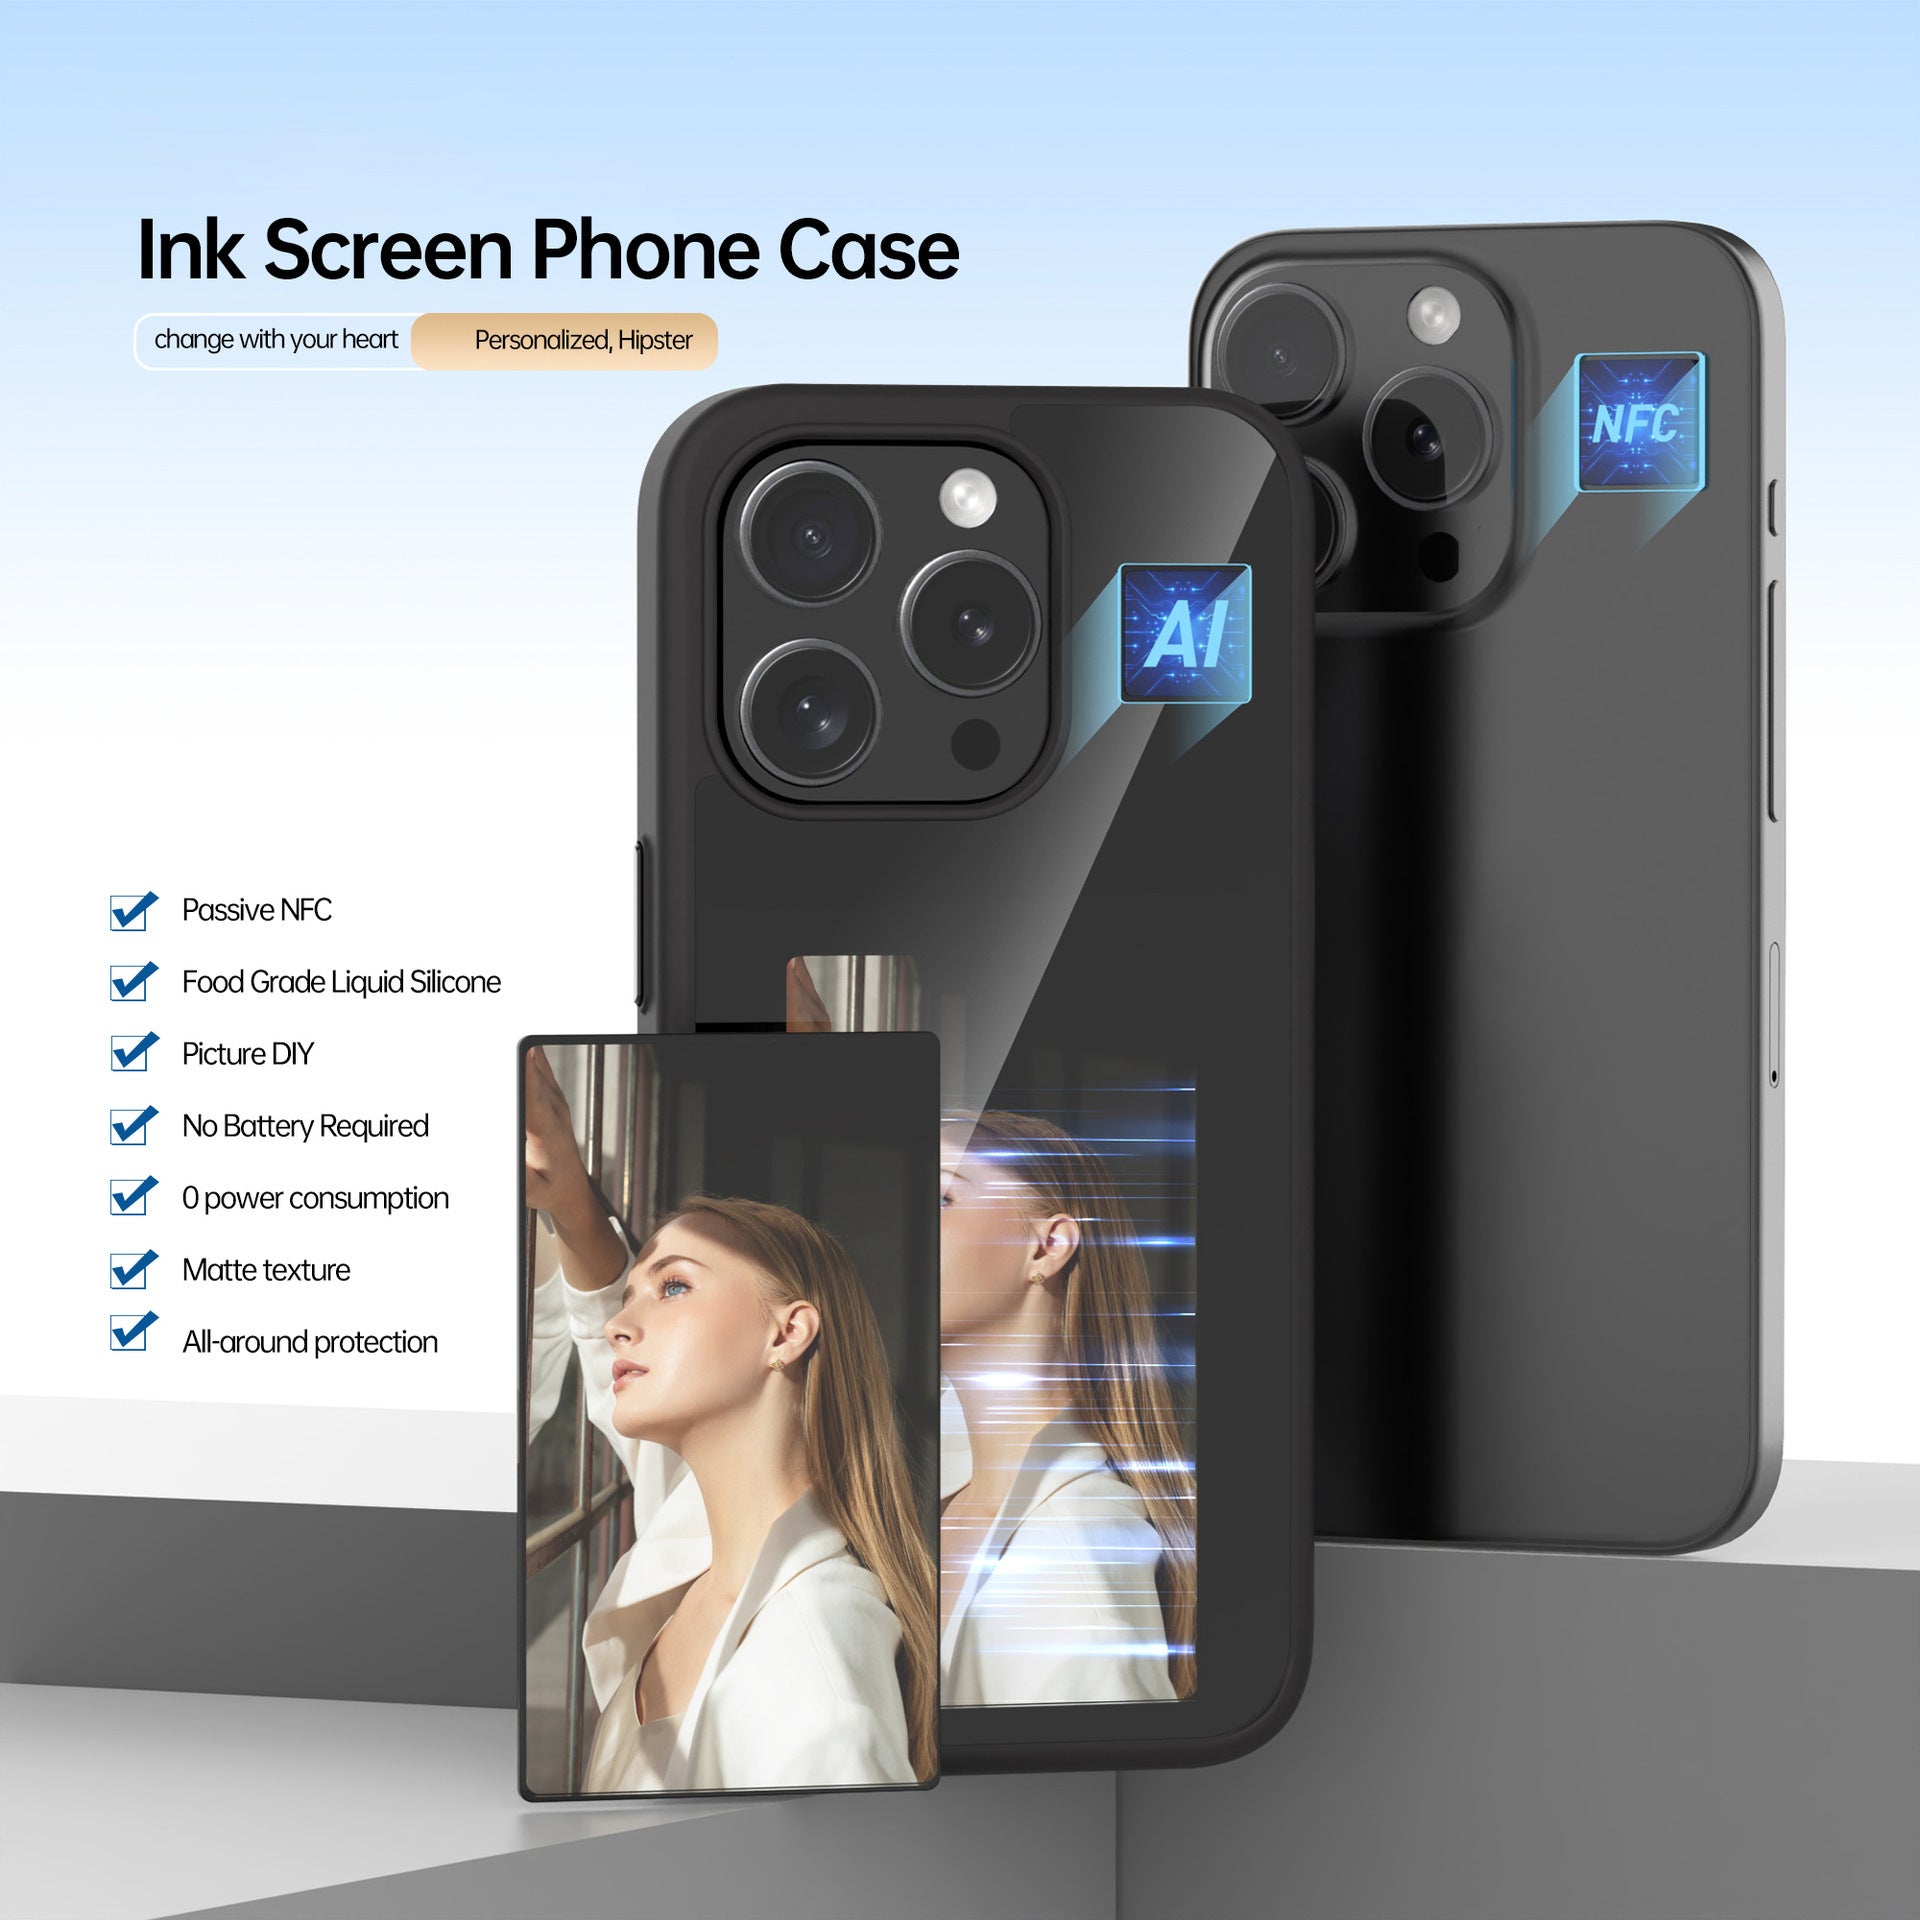 Ink Screen For Phone E Ink Screen Phone Case